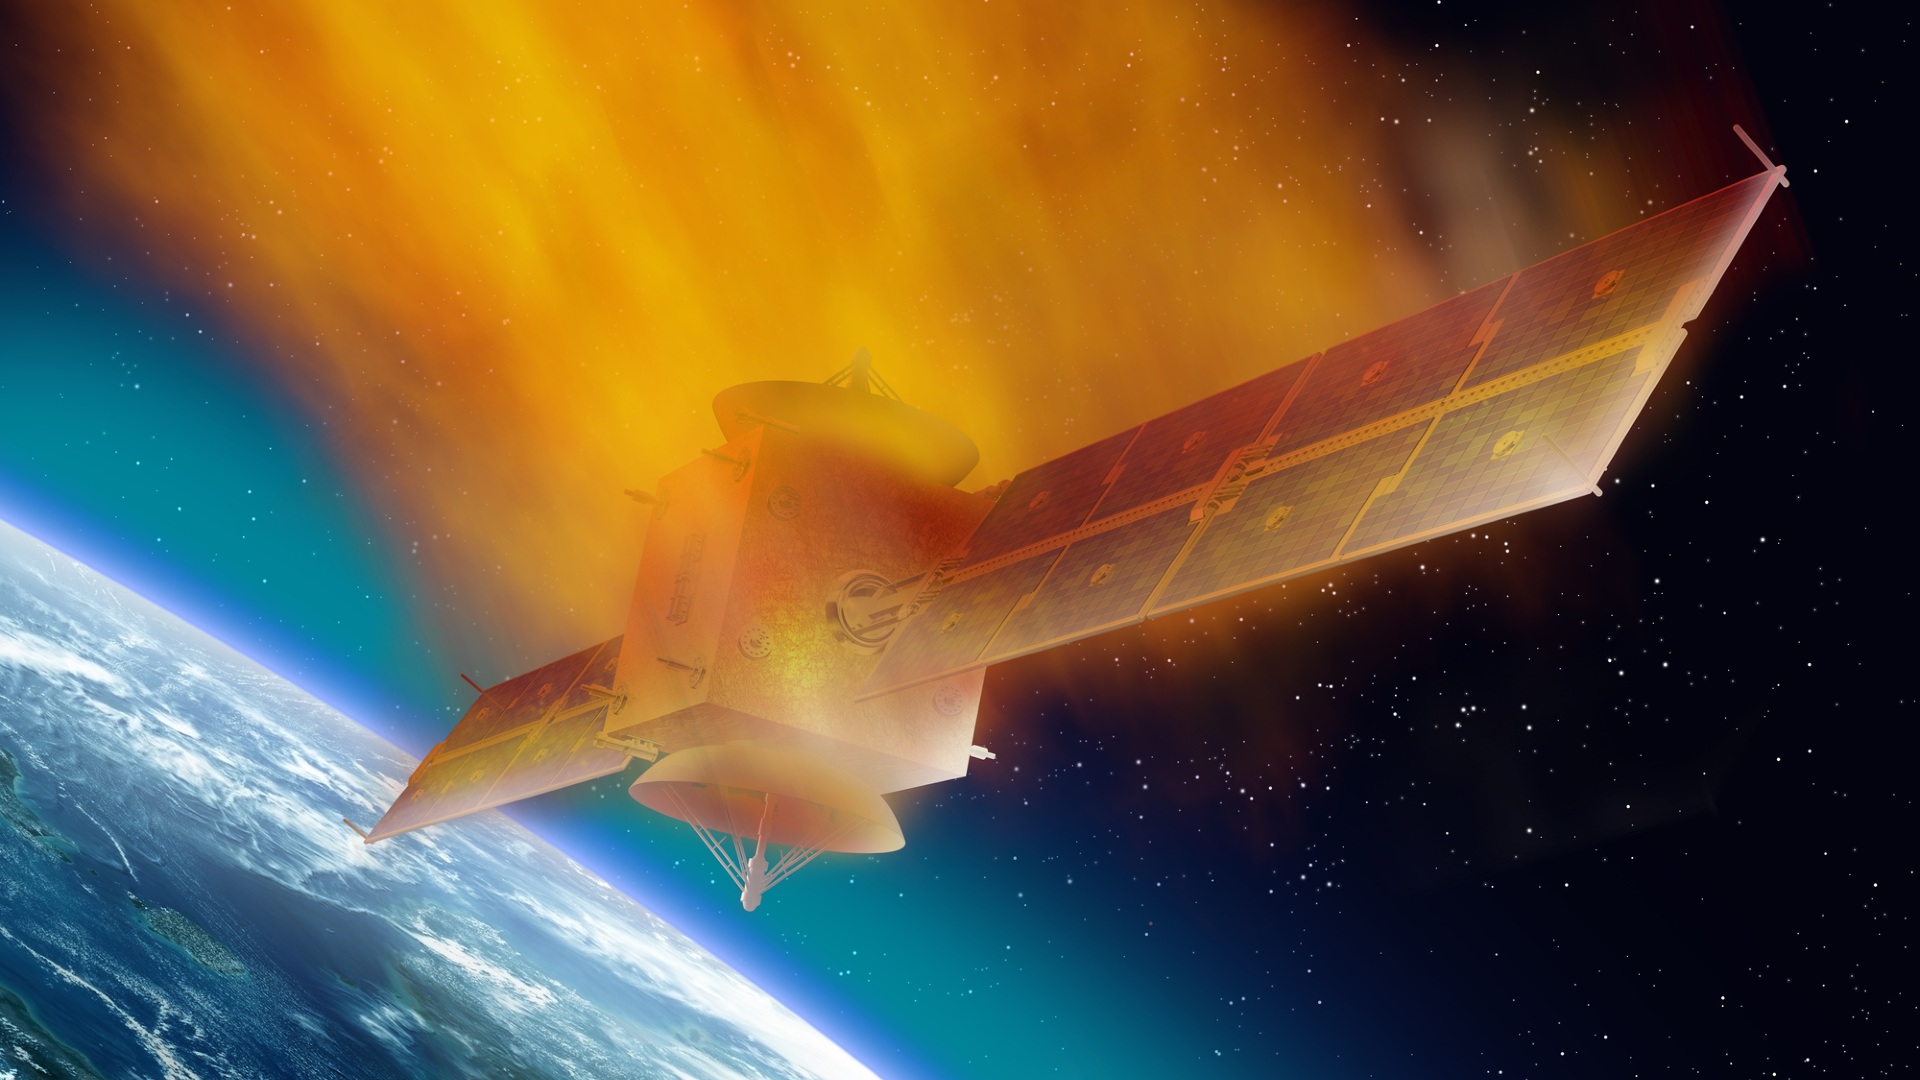 Controversial paper claims satellite 'megaconstellations' like SpaceX's  could weaken Earth's magnetic field and cause 'atmospheric stripping.'  Should we be worried? | Live Science